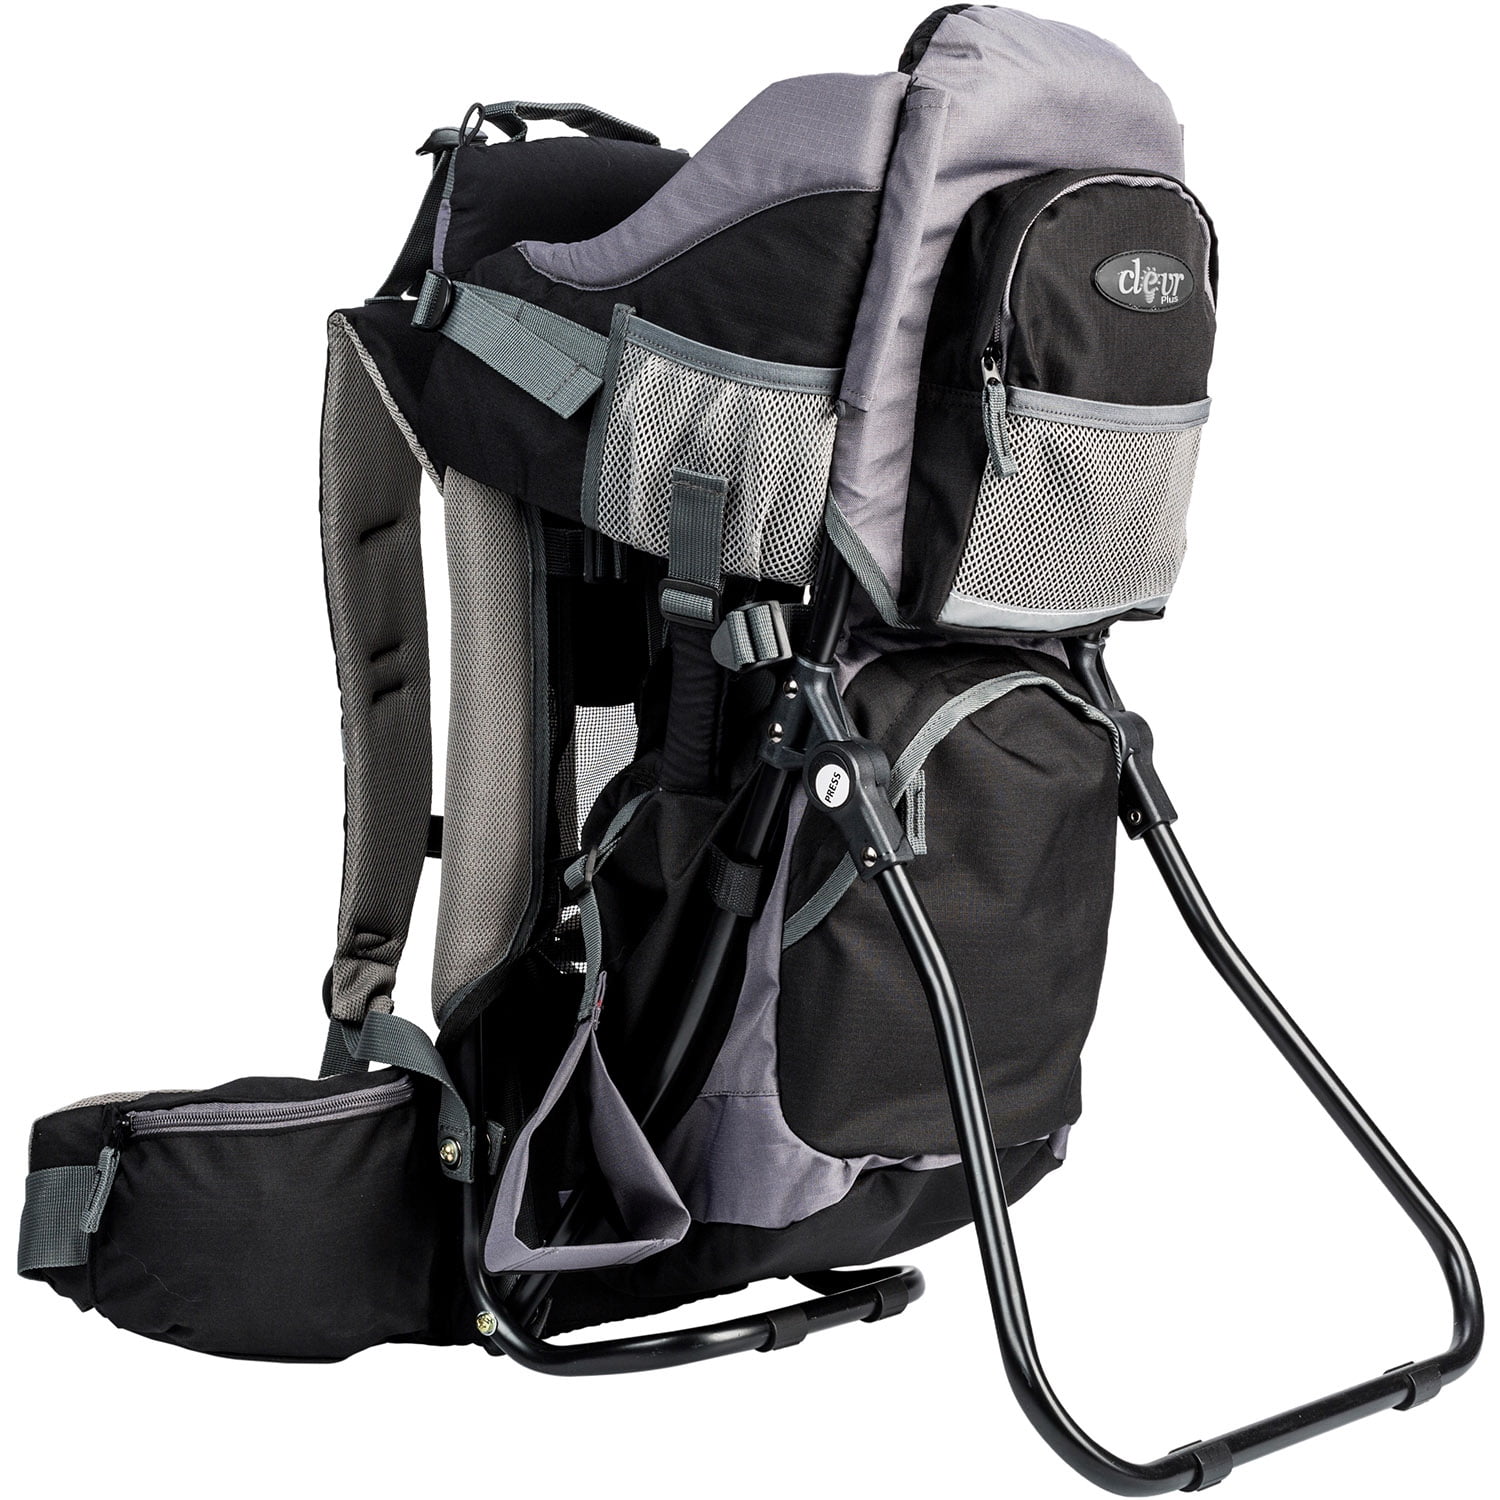 standing backpack child carrier